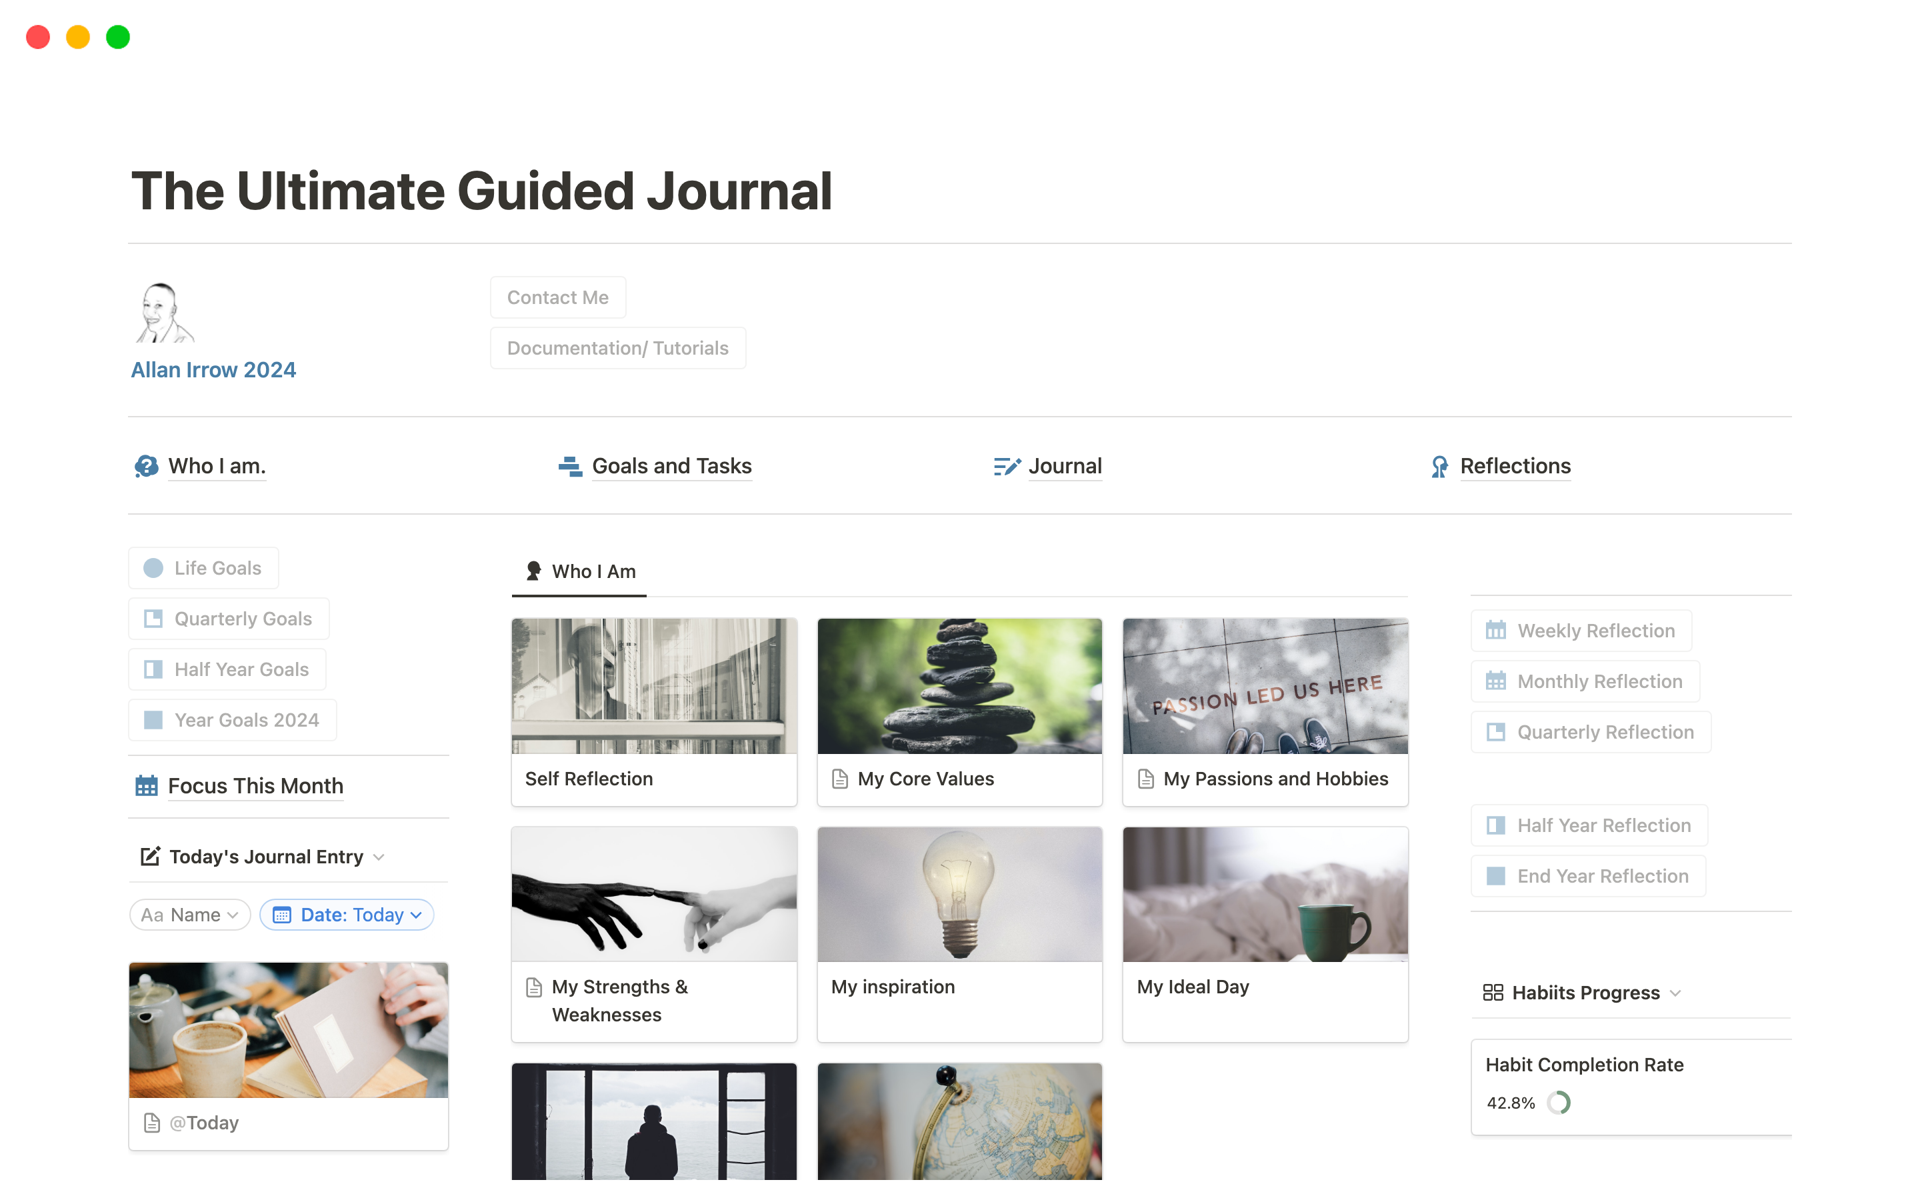 The Ultimate Guided Journal is an all-in-one dashboard, combining journaling, goal setting, task management, reflection, and self-discovery.